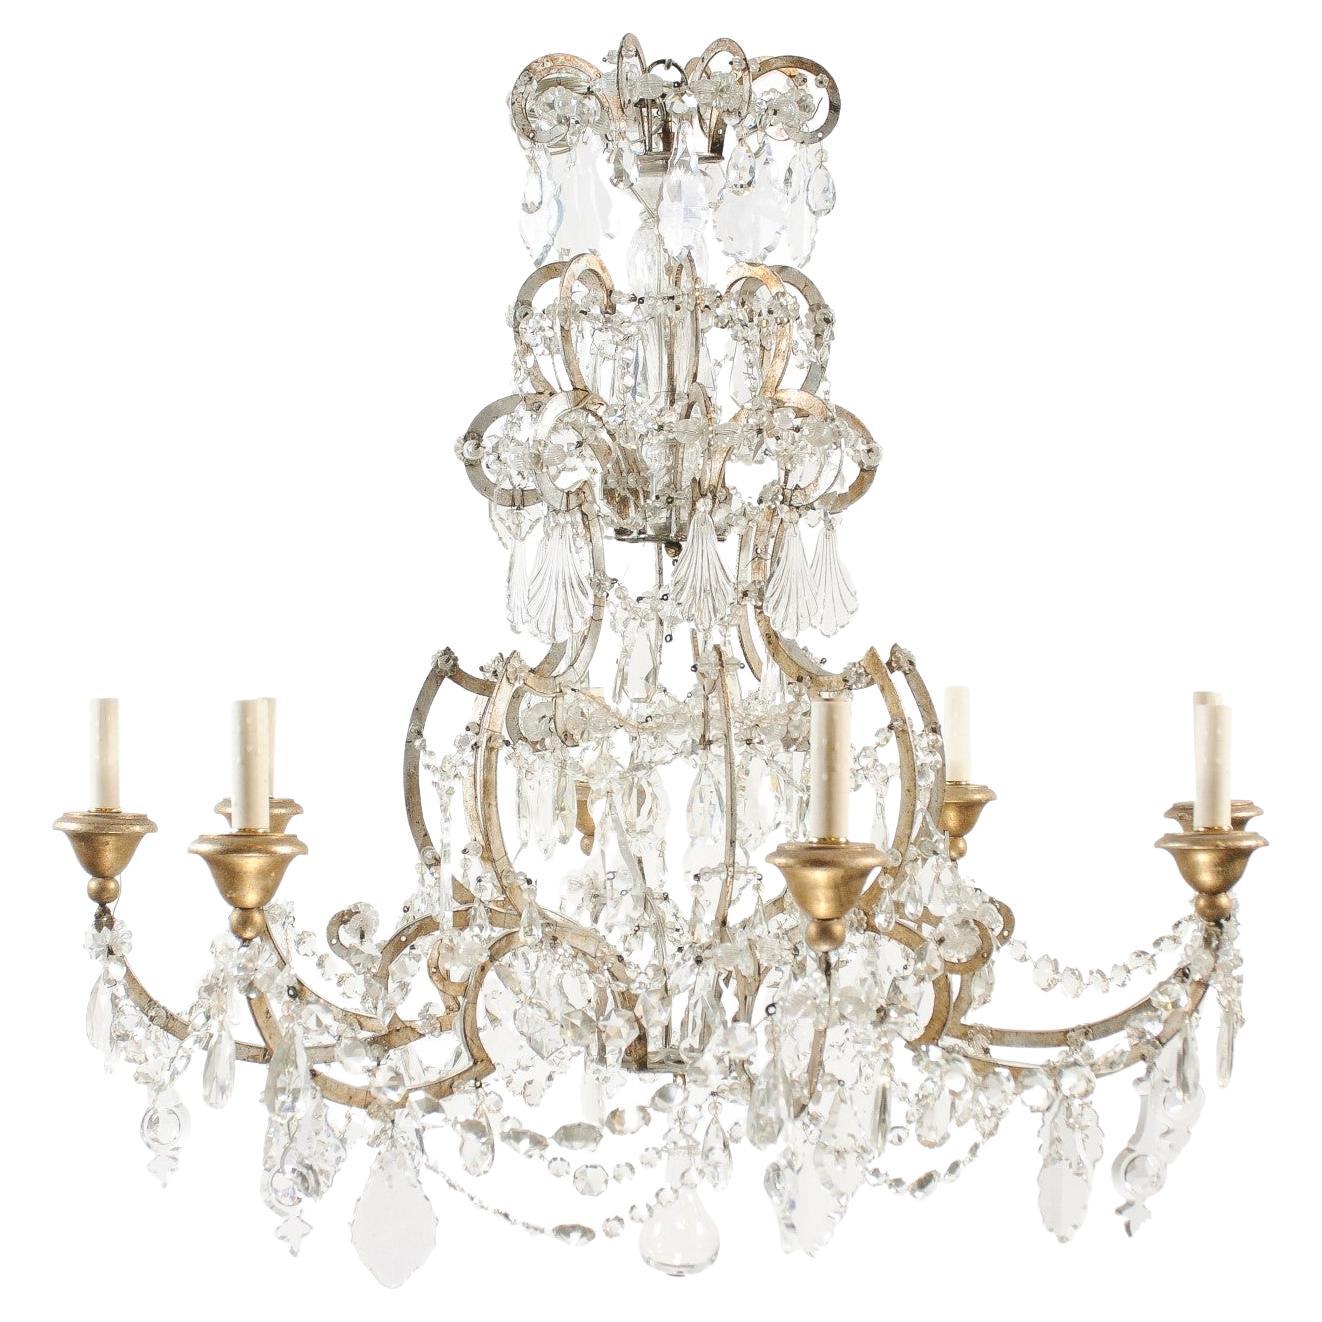 Italian Crystal & Silvered Wood Chandelier with 8 Lights, 19th Century For Sale